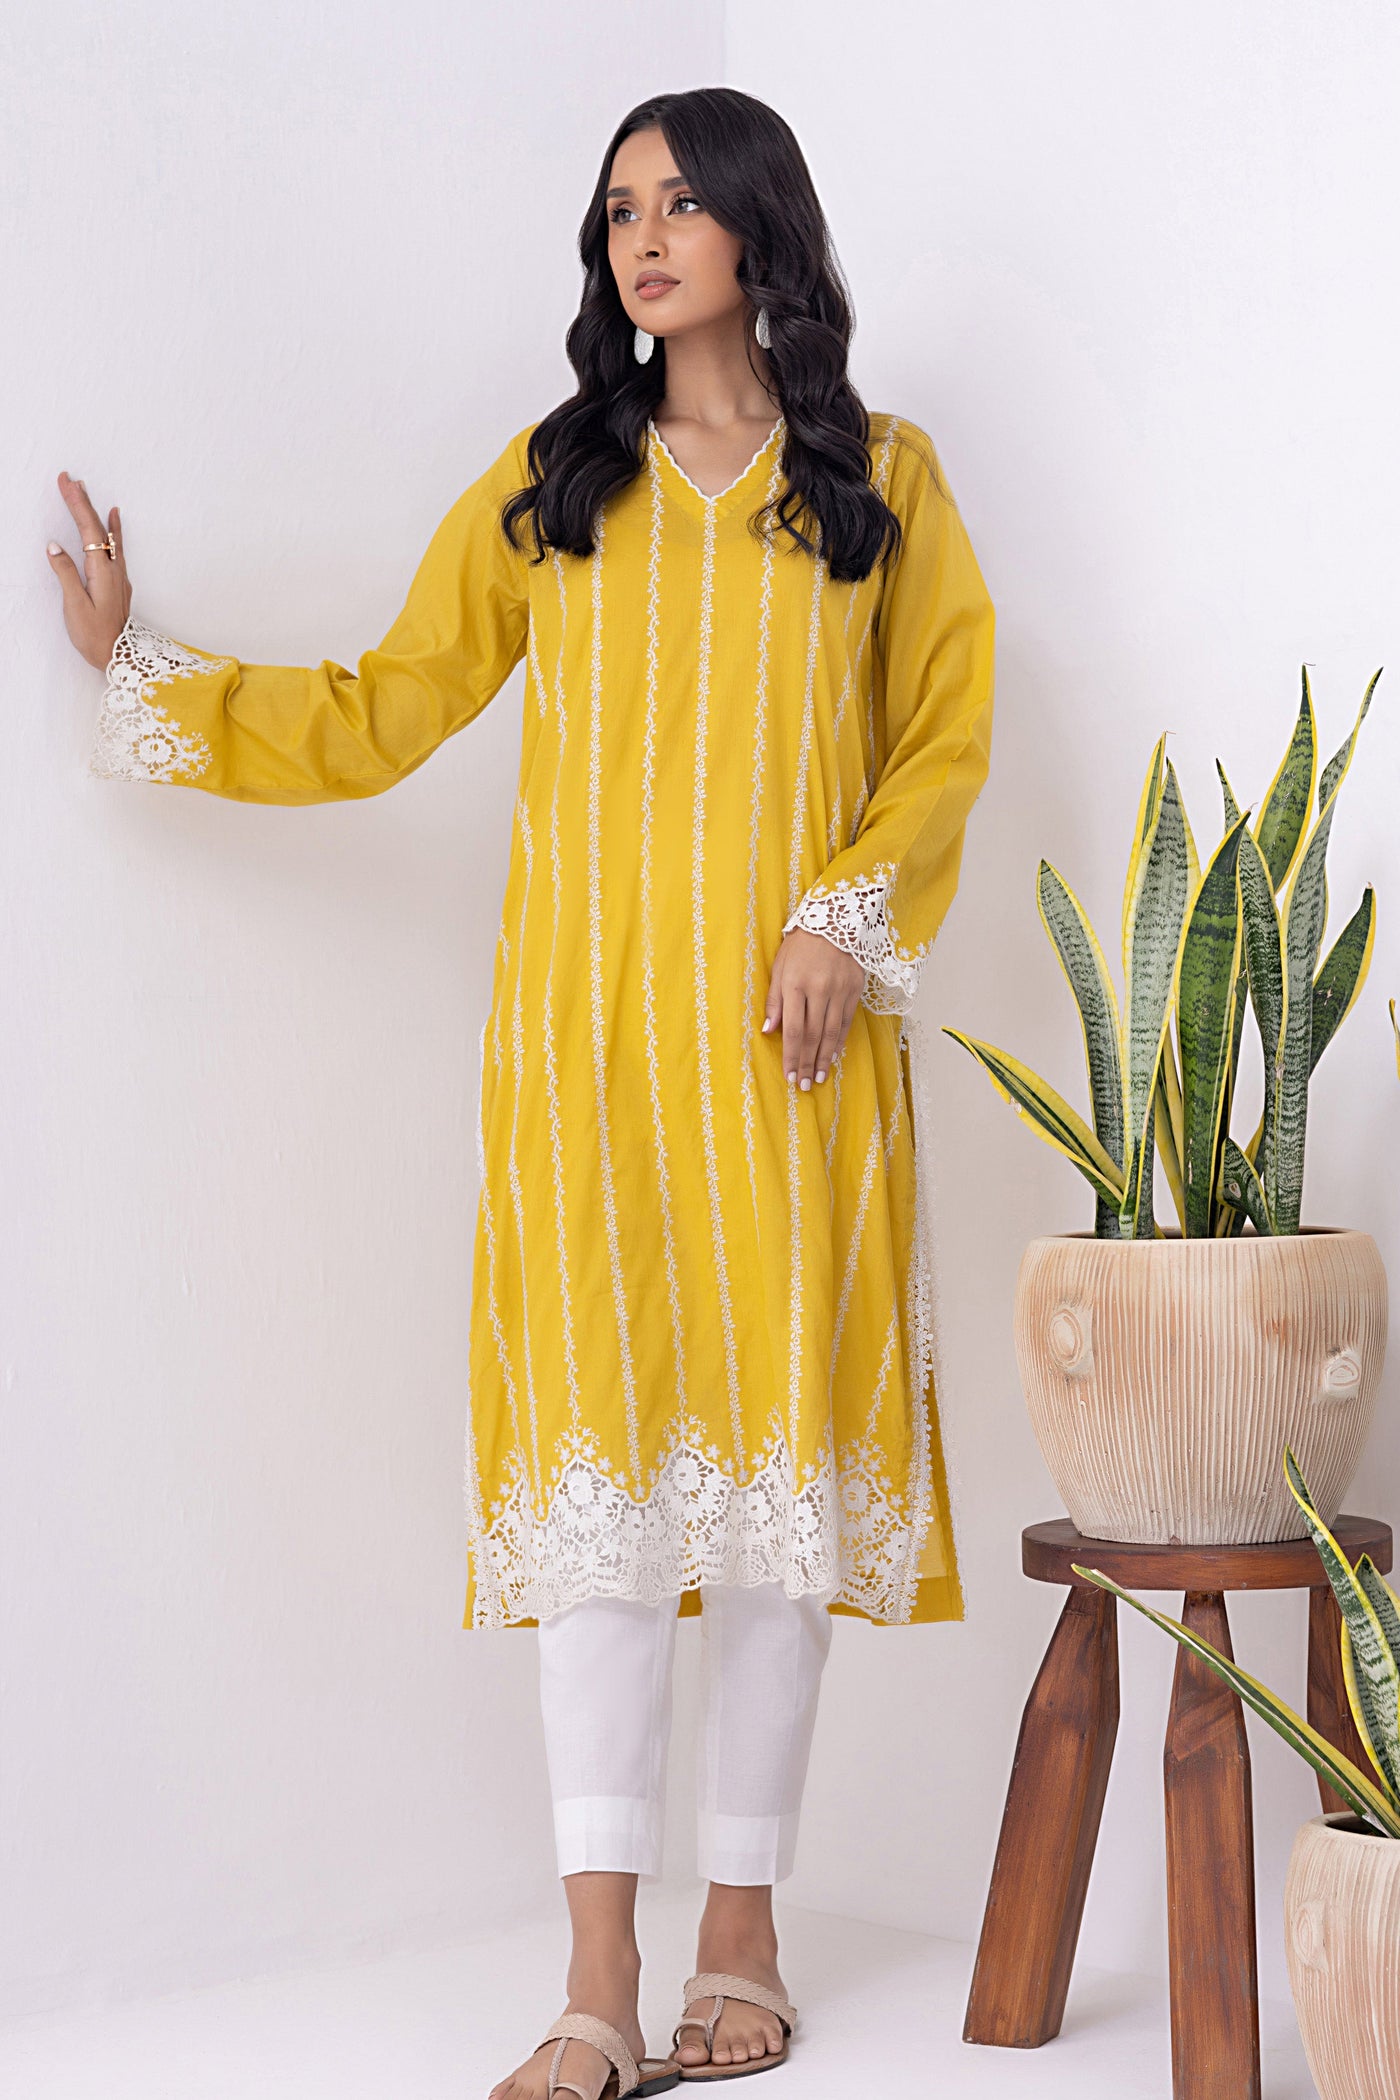 Lakhany 01 Piece Ready to Wear Dyed Embroidered Shirt - LG-SK-0064